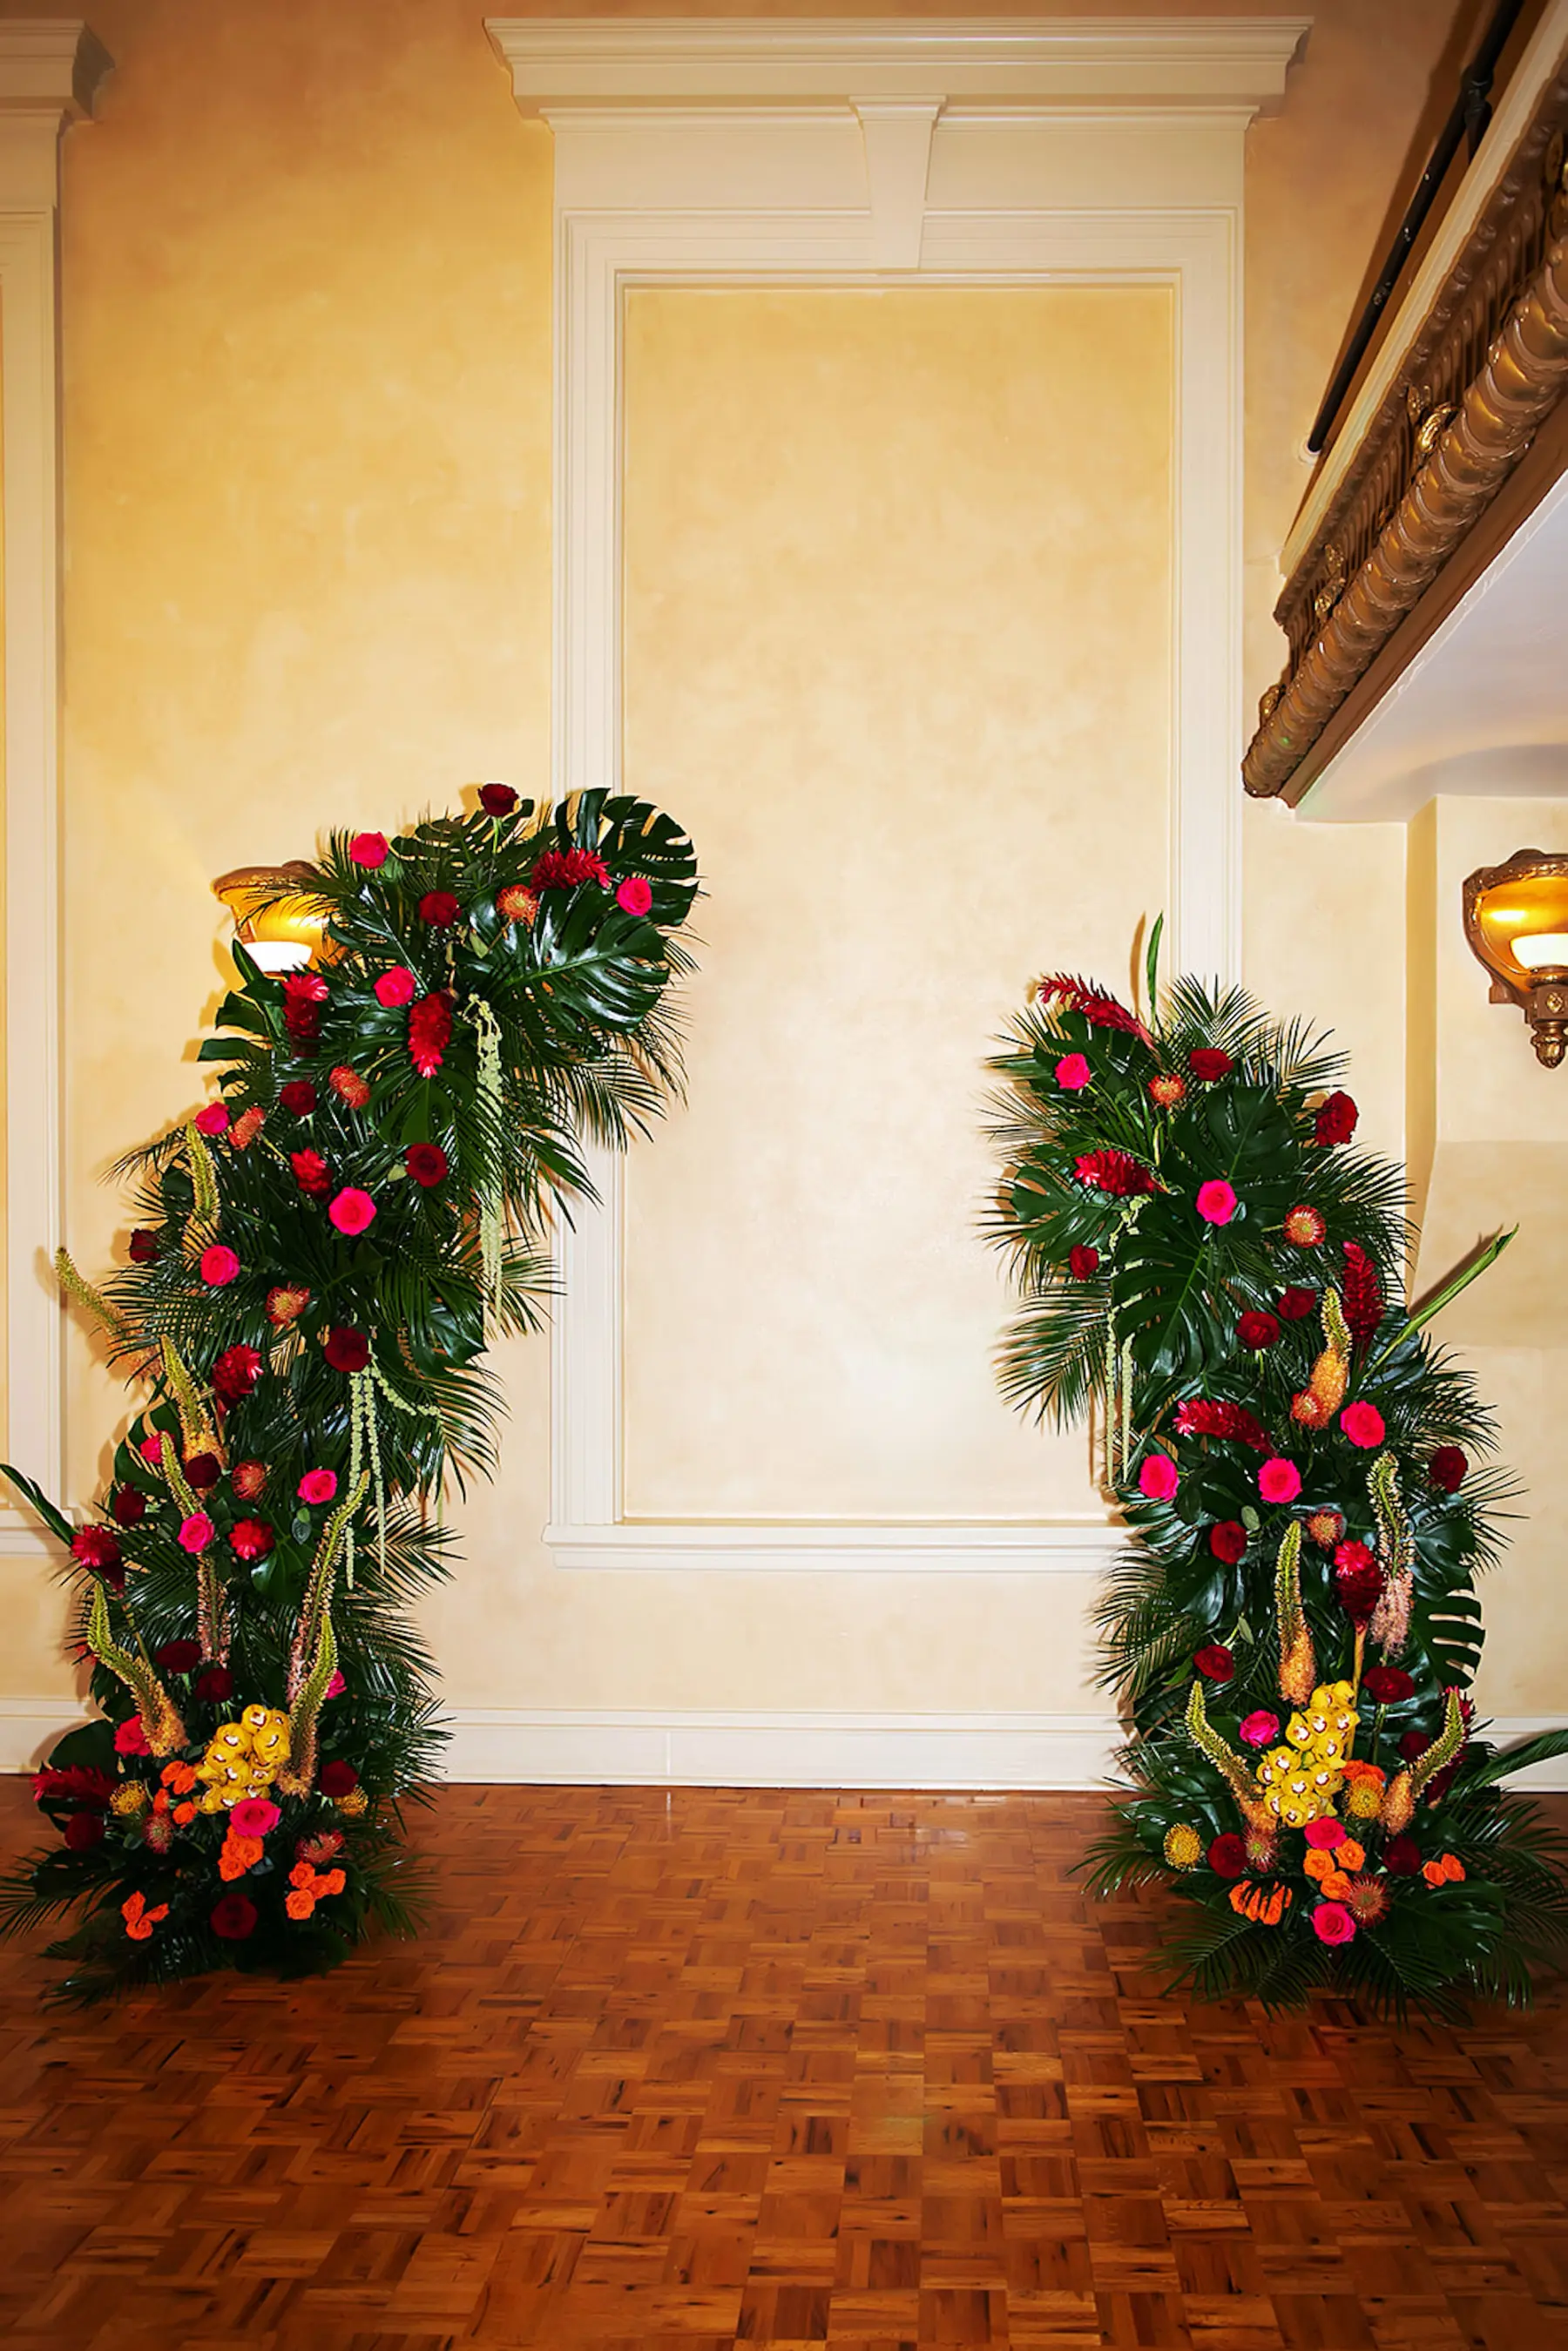 Asymmetrical Tropical Wedding Ceremony Floral Arch with Red and Pink Roses, Yellow Wisteria, Monstera, Palm Leaf Decor Inspiration